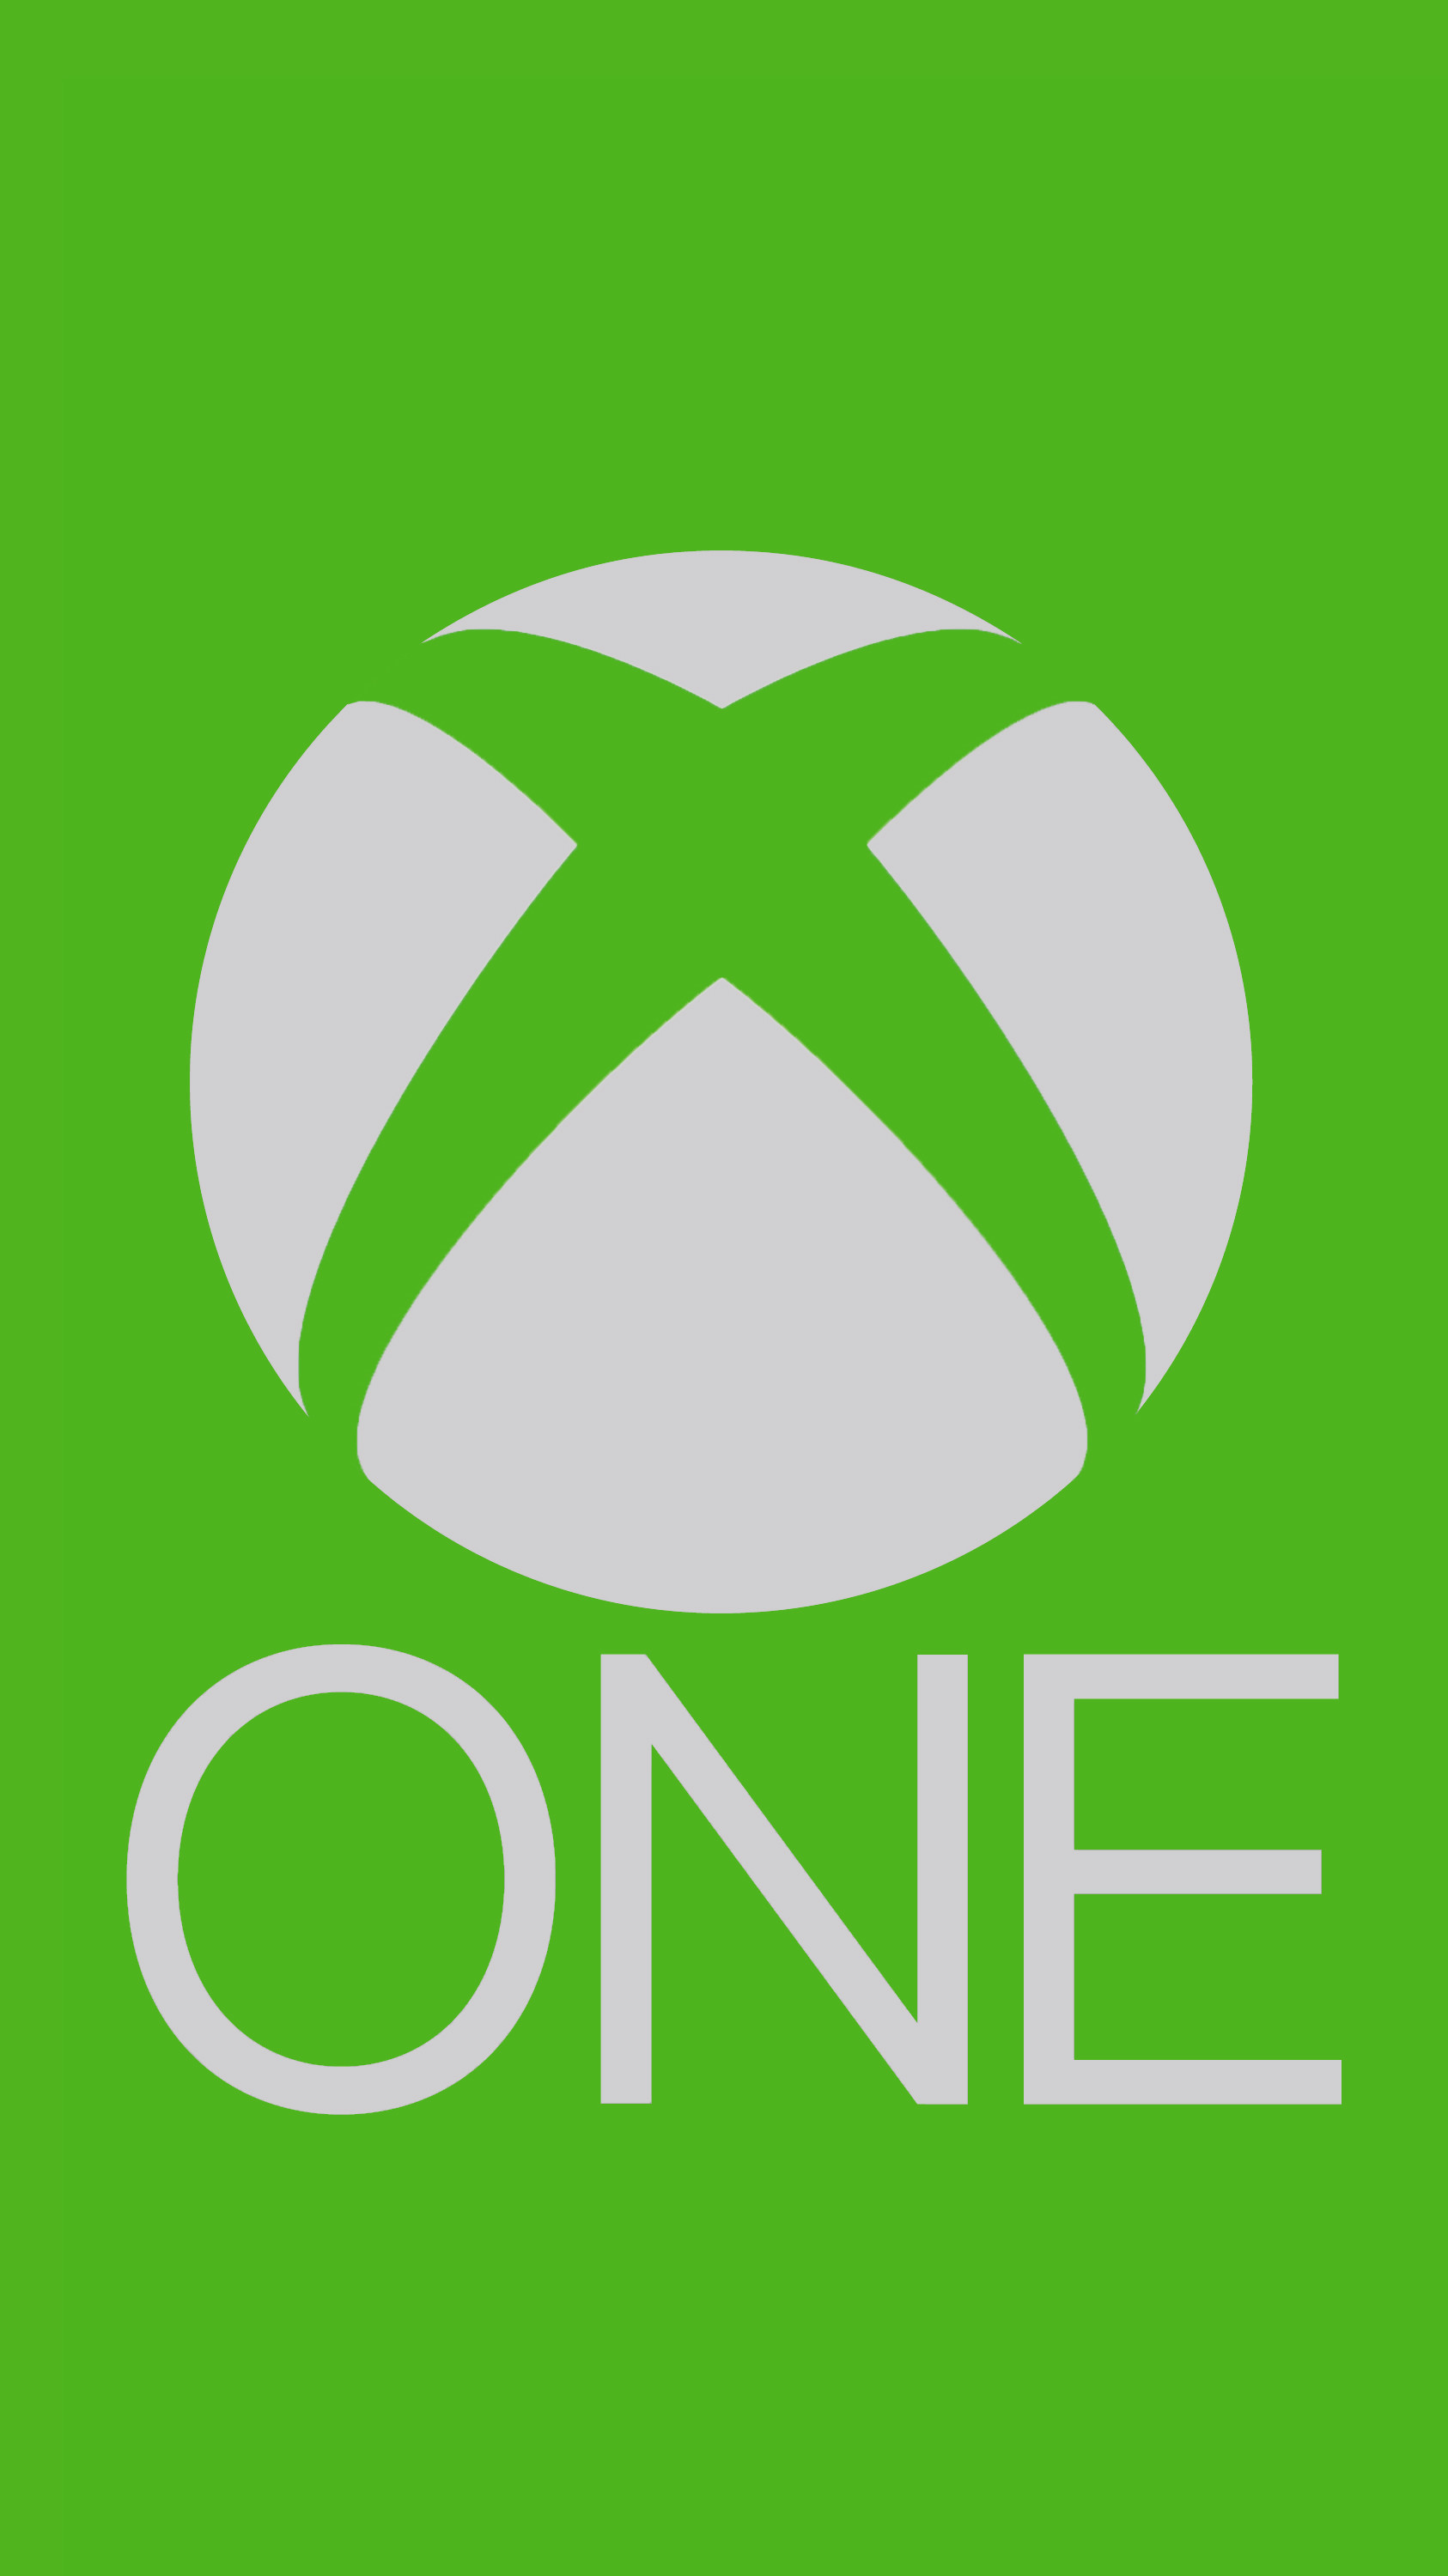 Xbox One Hd Wallpaper for Desktop and Mobiles iPhone 4  4S  iPod  HD  Wallpaper  Wallpapersnet